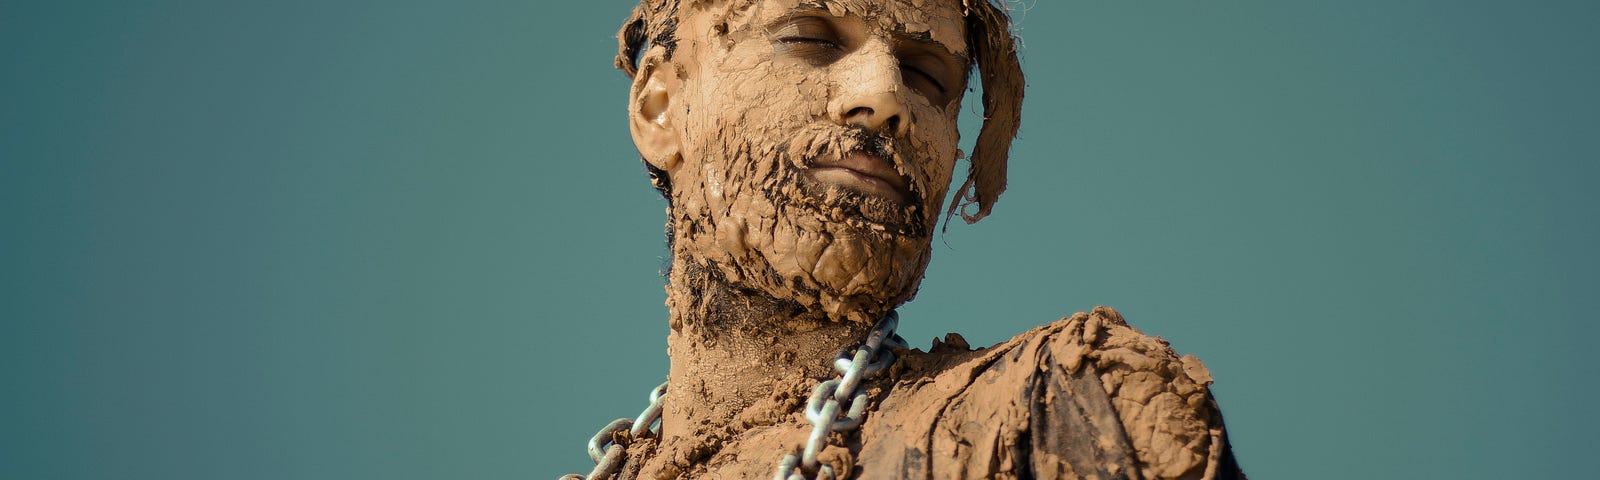 A man covered in clay and wearing a chain.